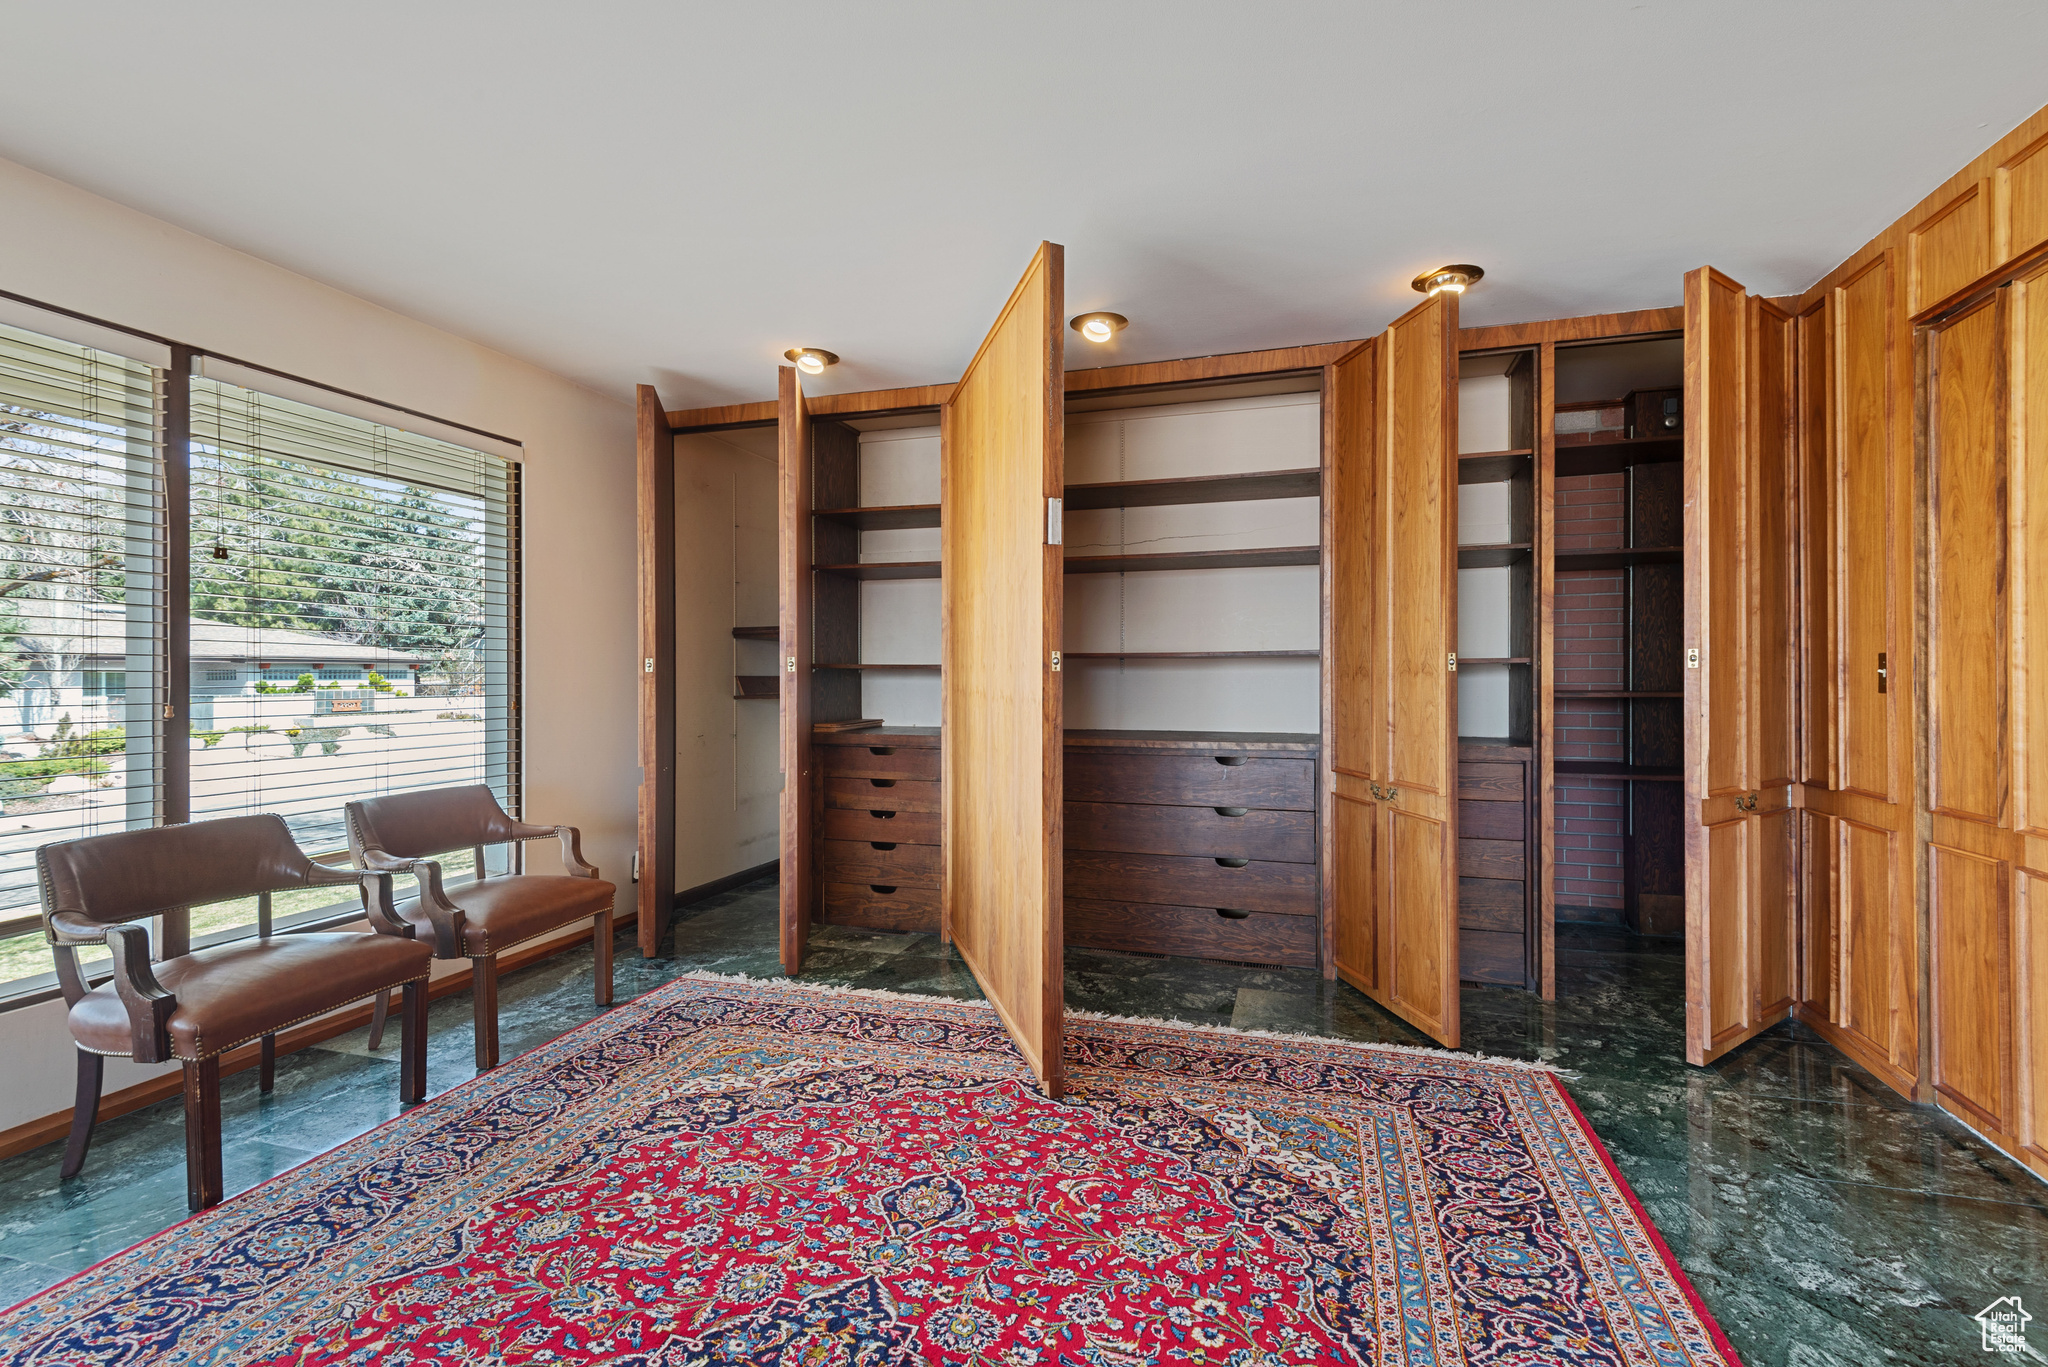 Office/Library View of Hidden Panelled bookshelves and drawers.